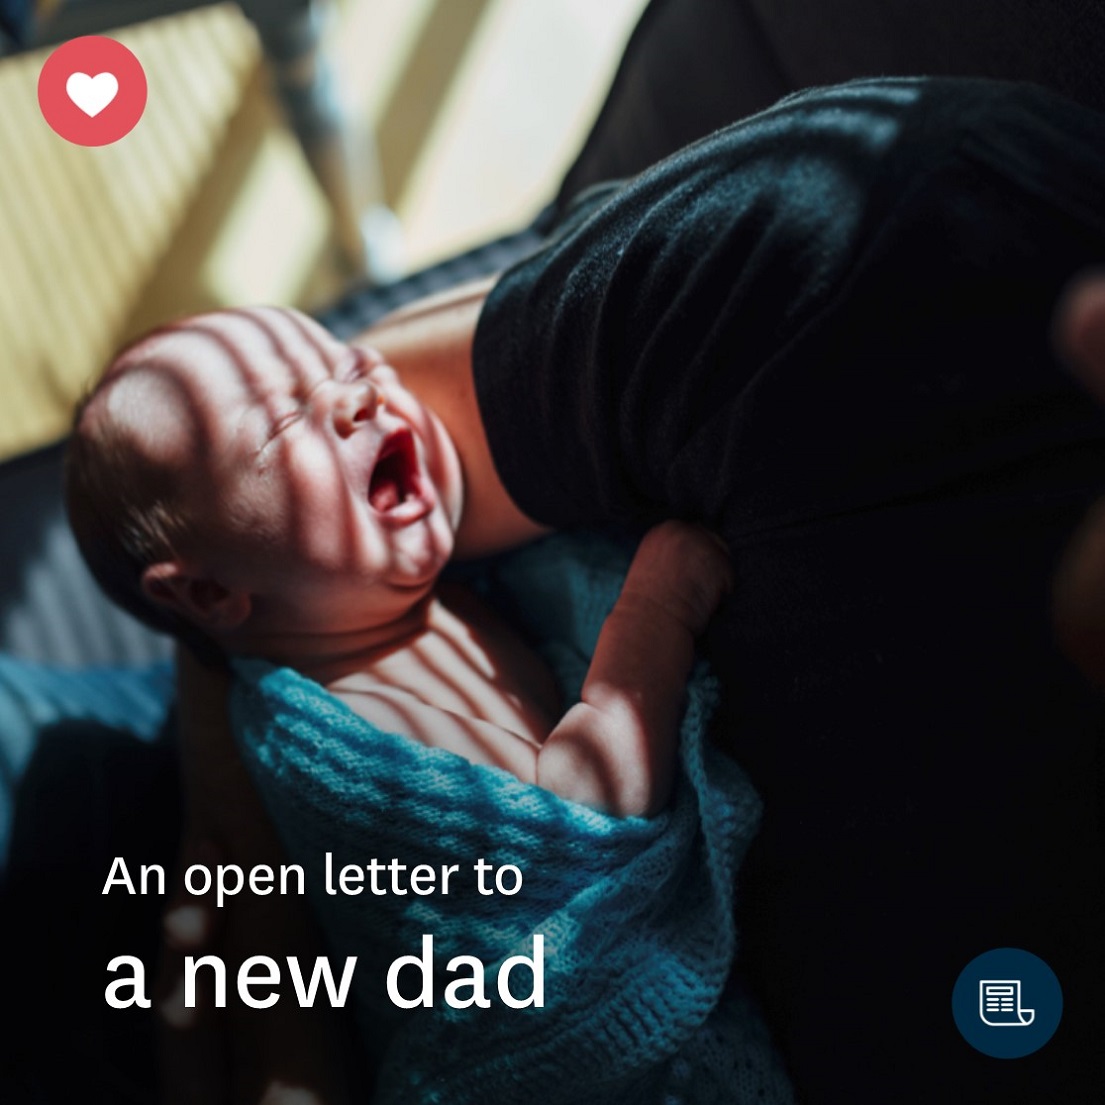 An open letter to a new dad